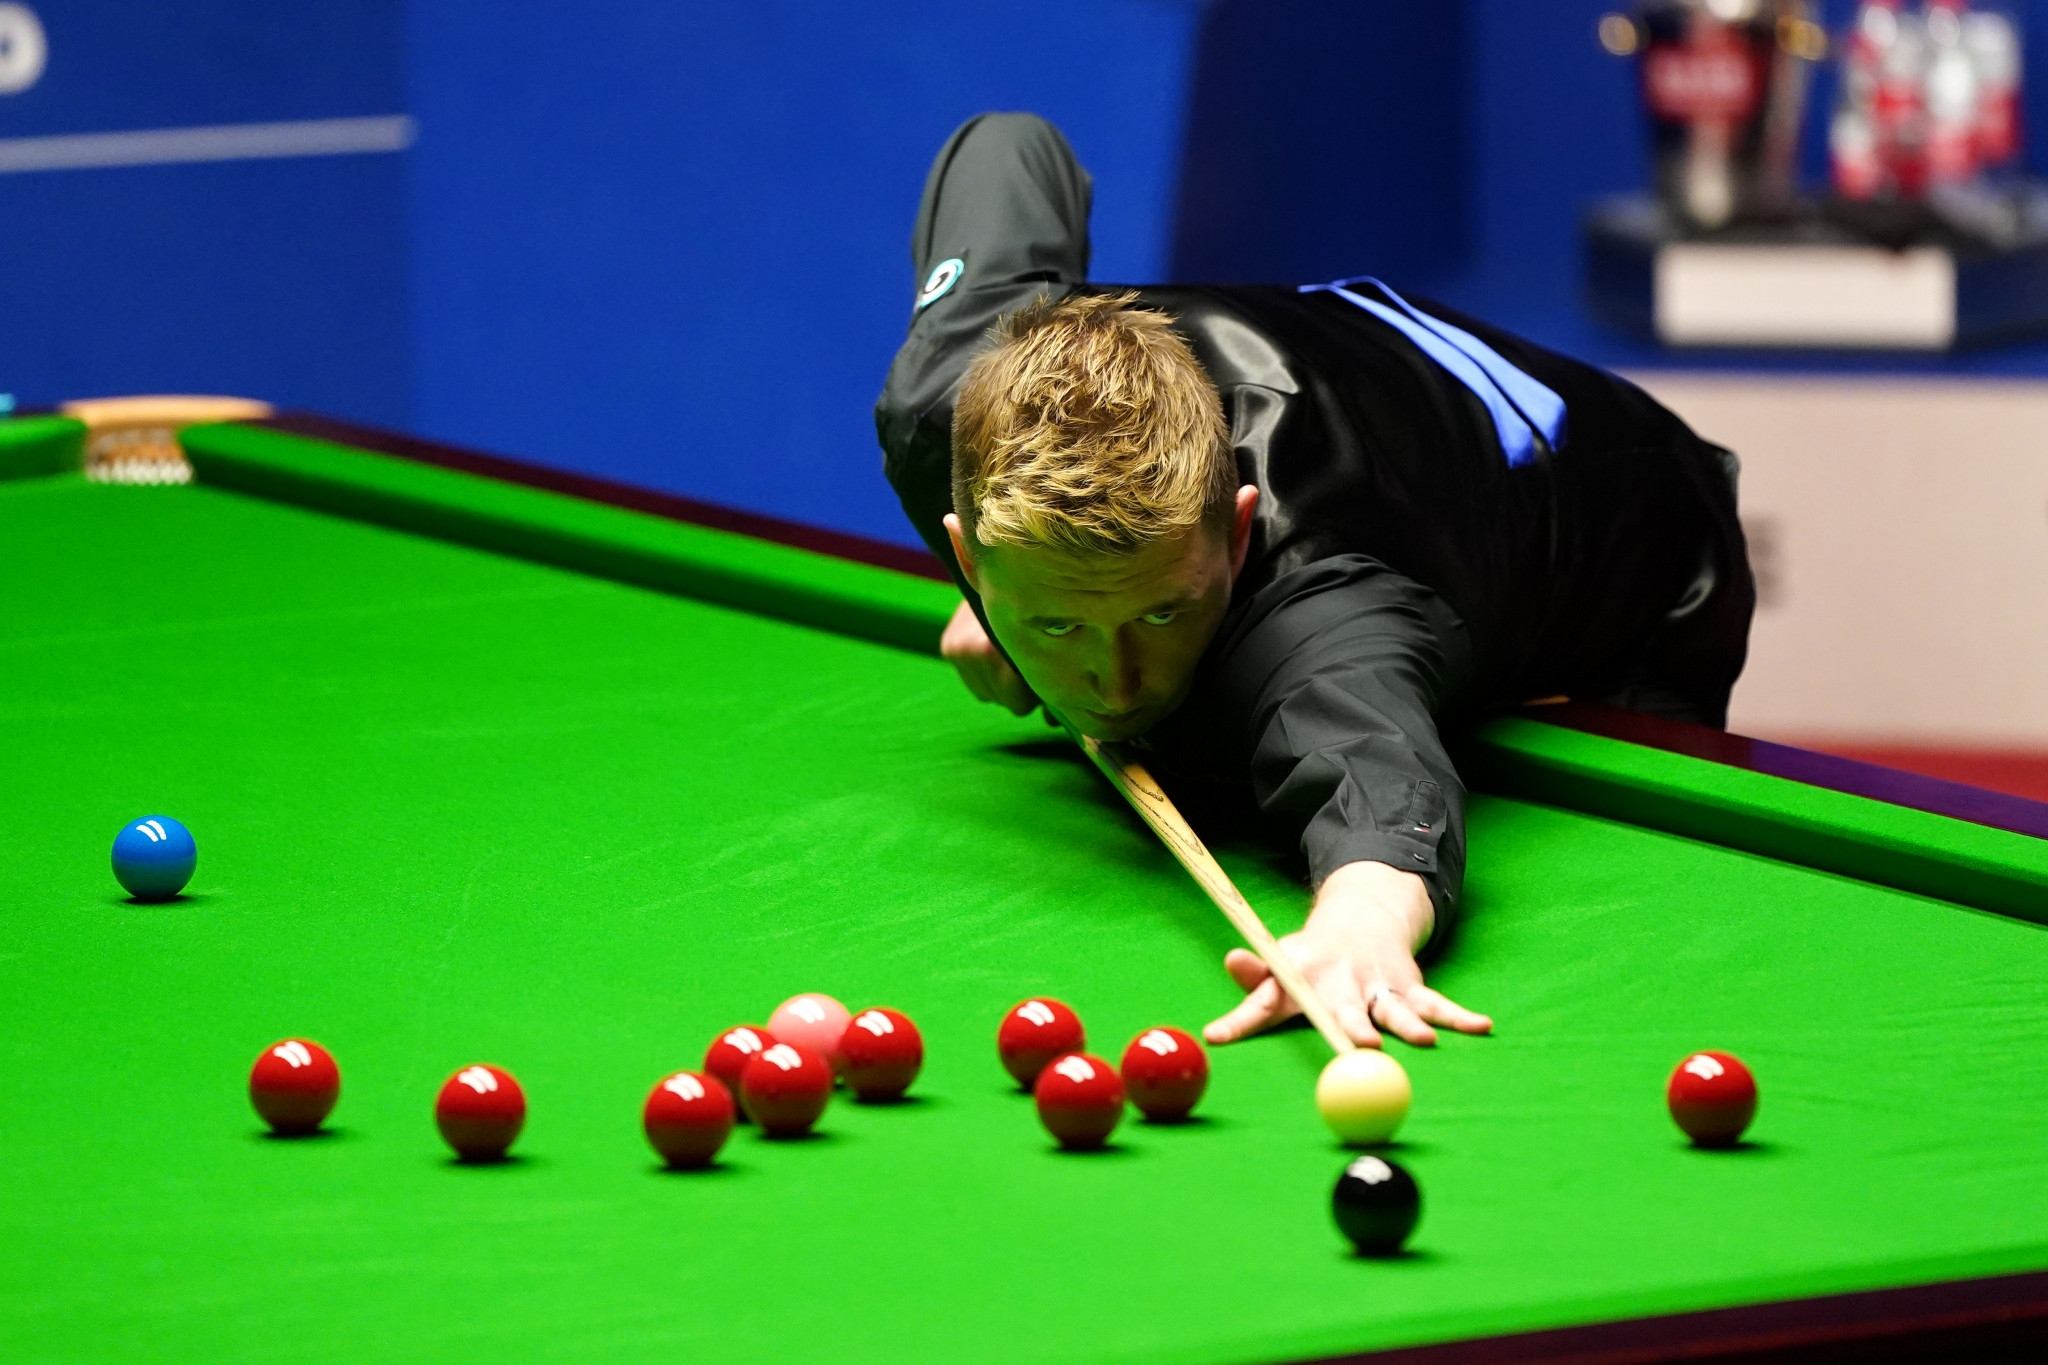 Wilson opens up four frame lead over Murphy in World Snooker Championship semi-final